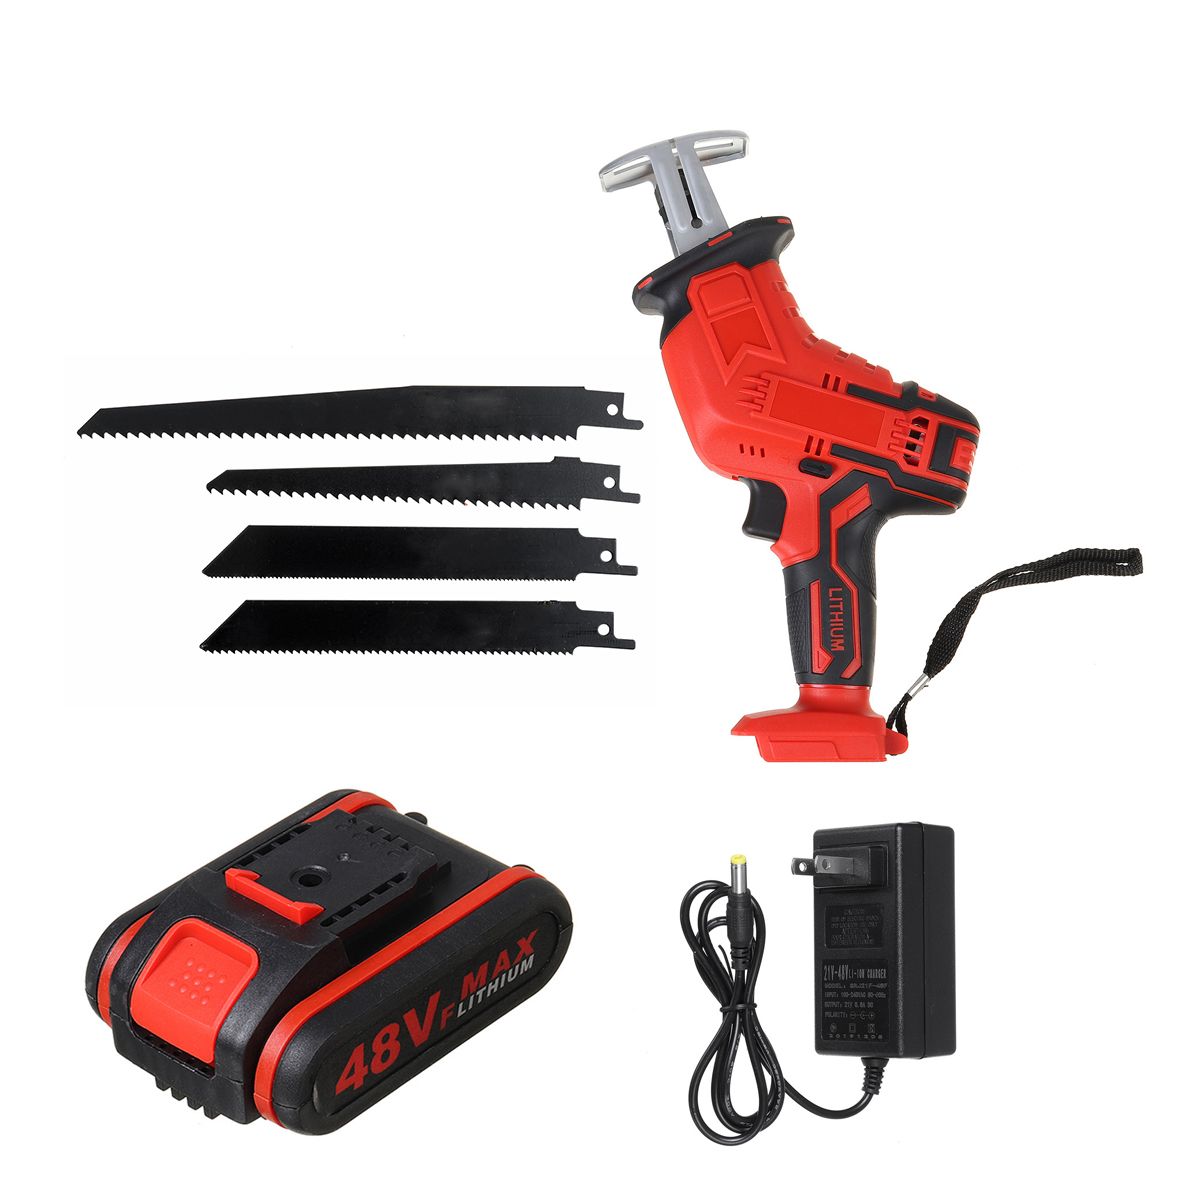 48V-2-Lithium-Battery-Wireless-Charging-Reciprocating-Saw-Wood-Metal-Cutter-Kit-1671503